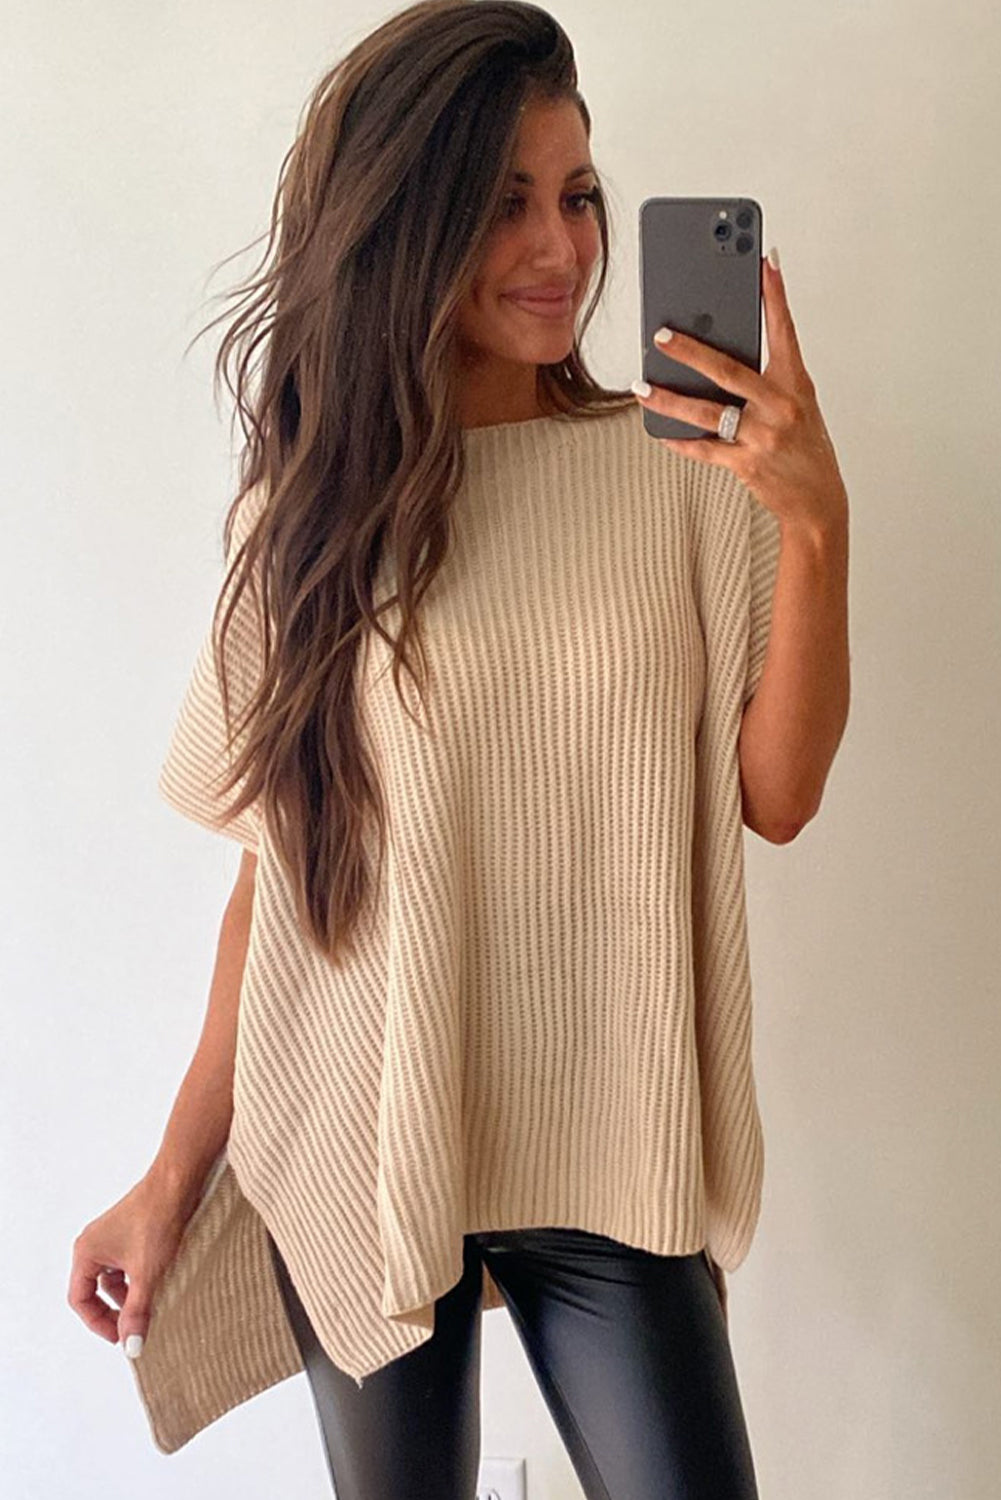 Textured Knit Draped Short Sleeve Tunic Sweater Top